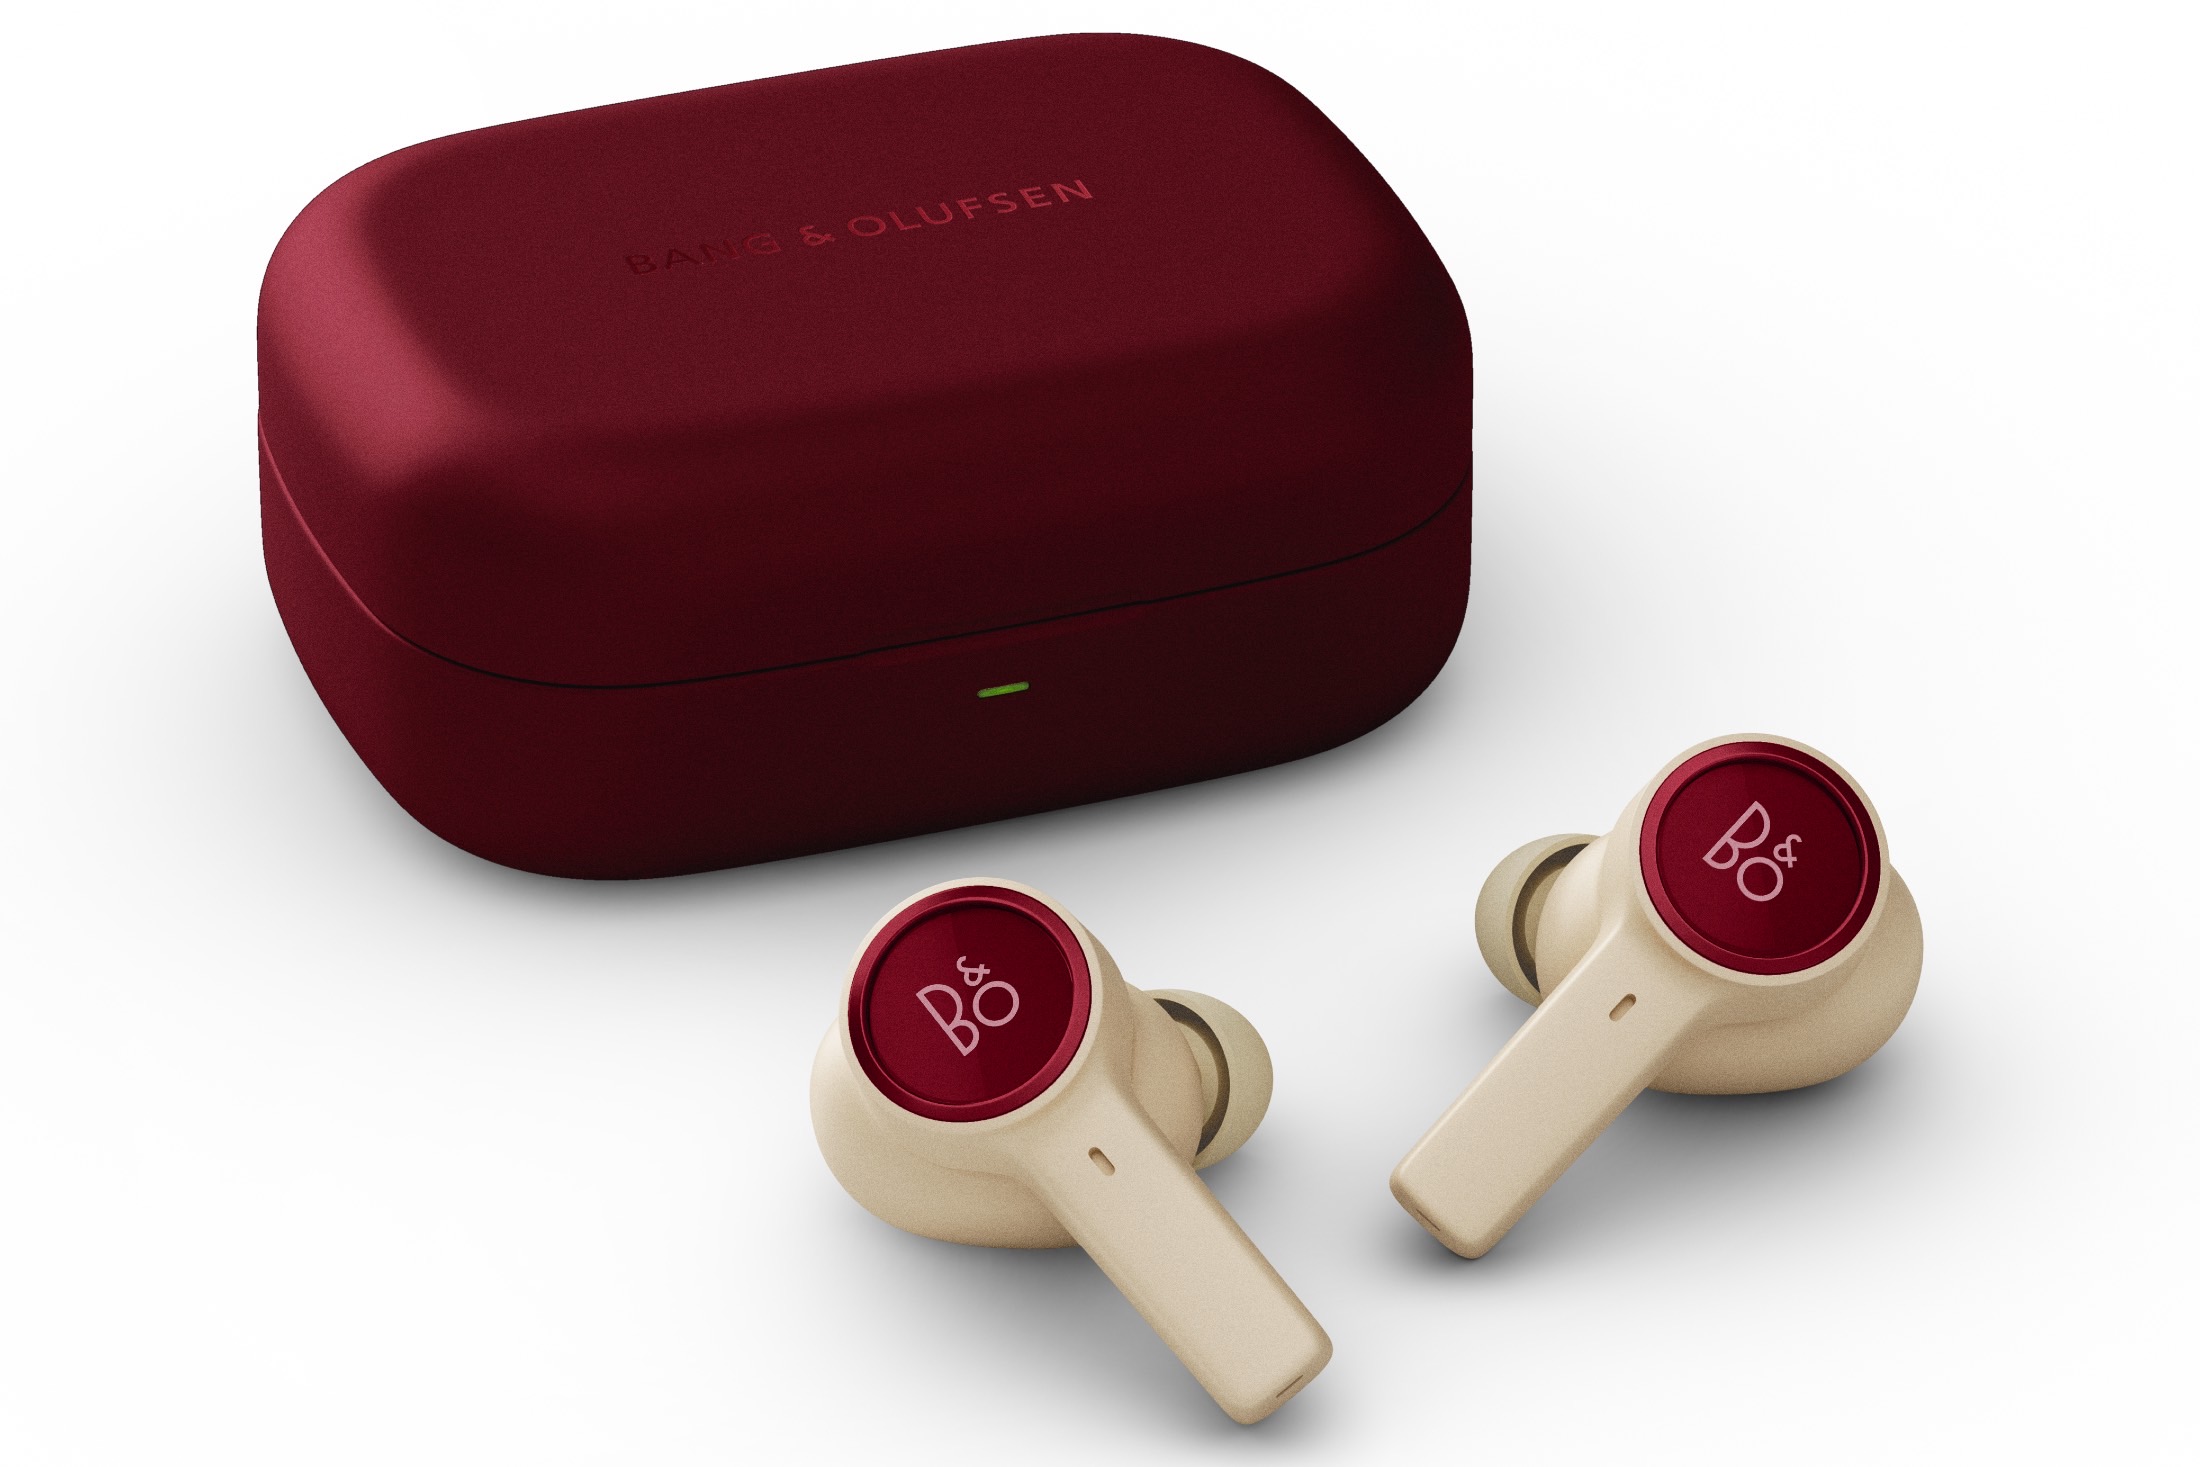 Bang & Olufsen Chinese New Year 2023 Beoplay EX.